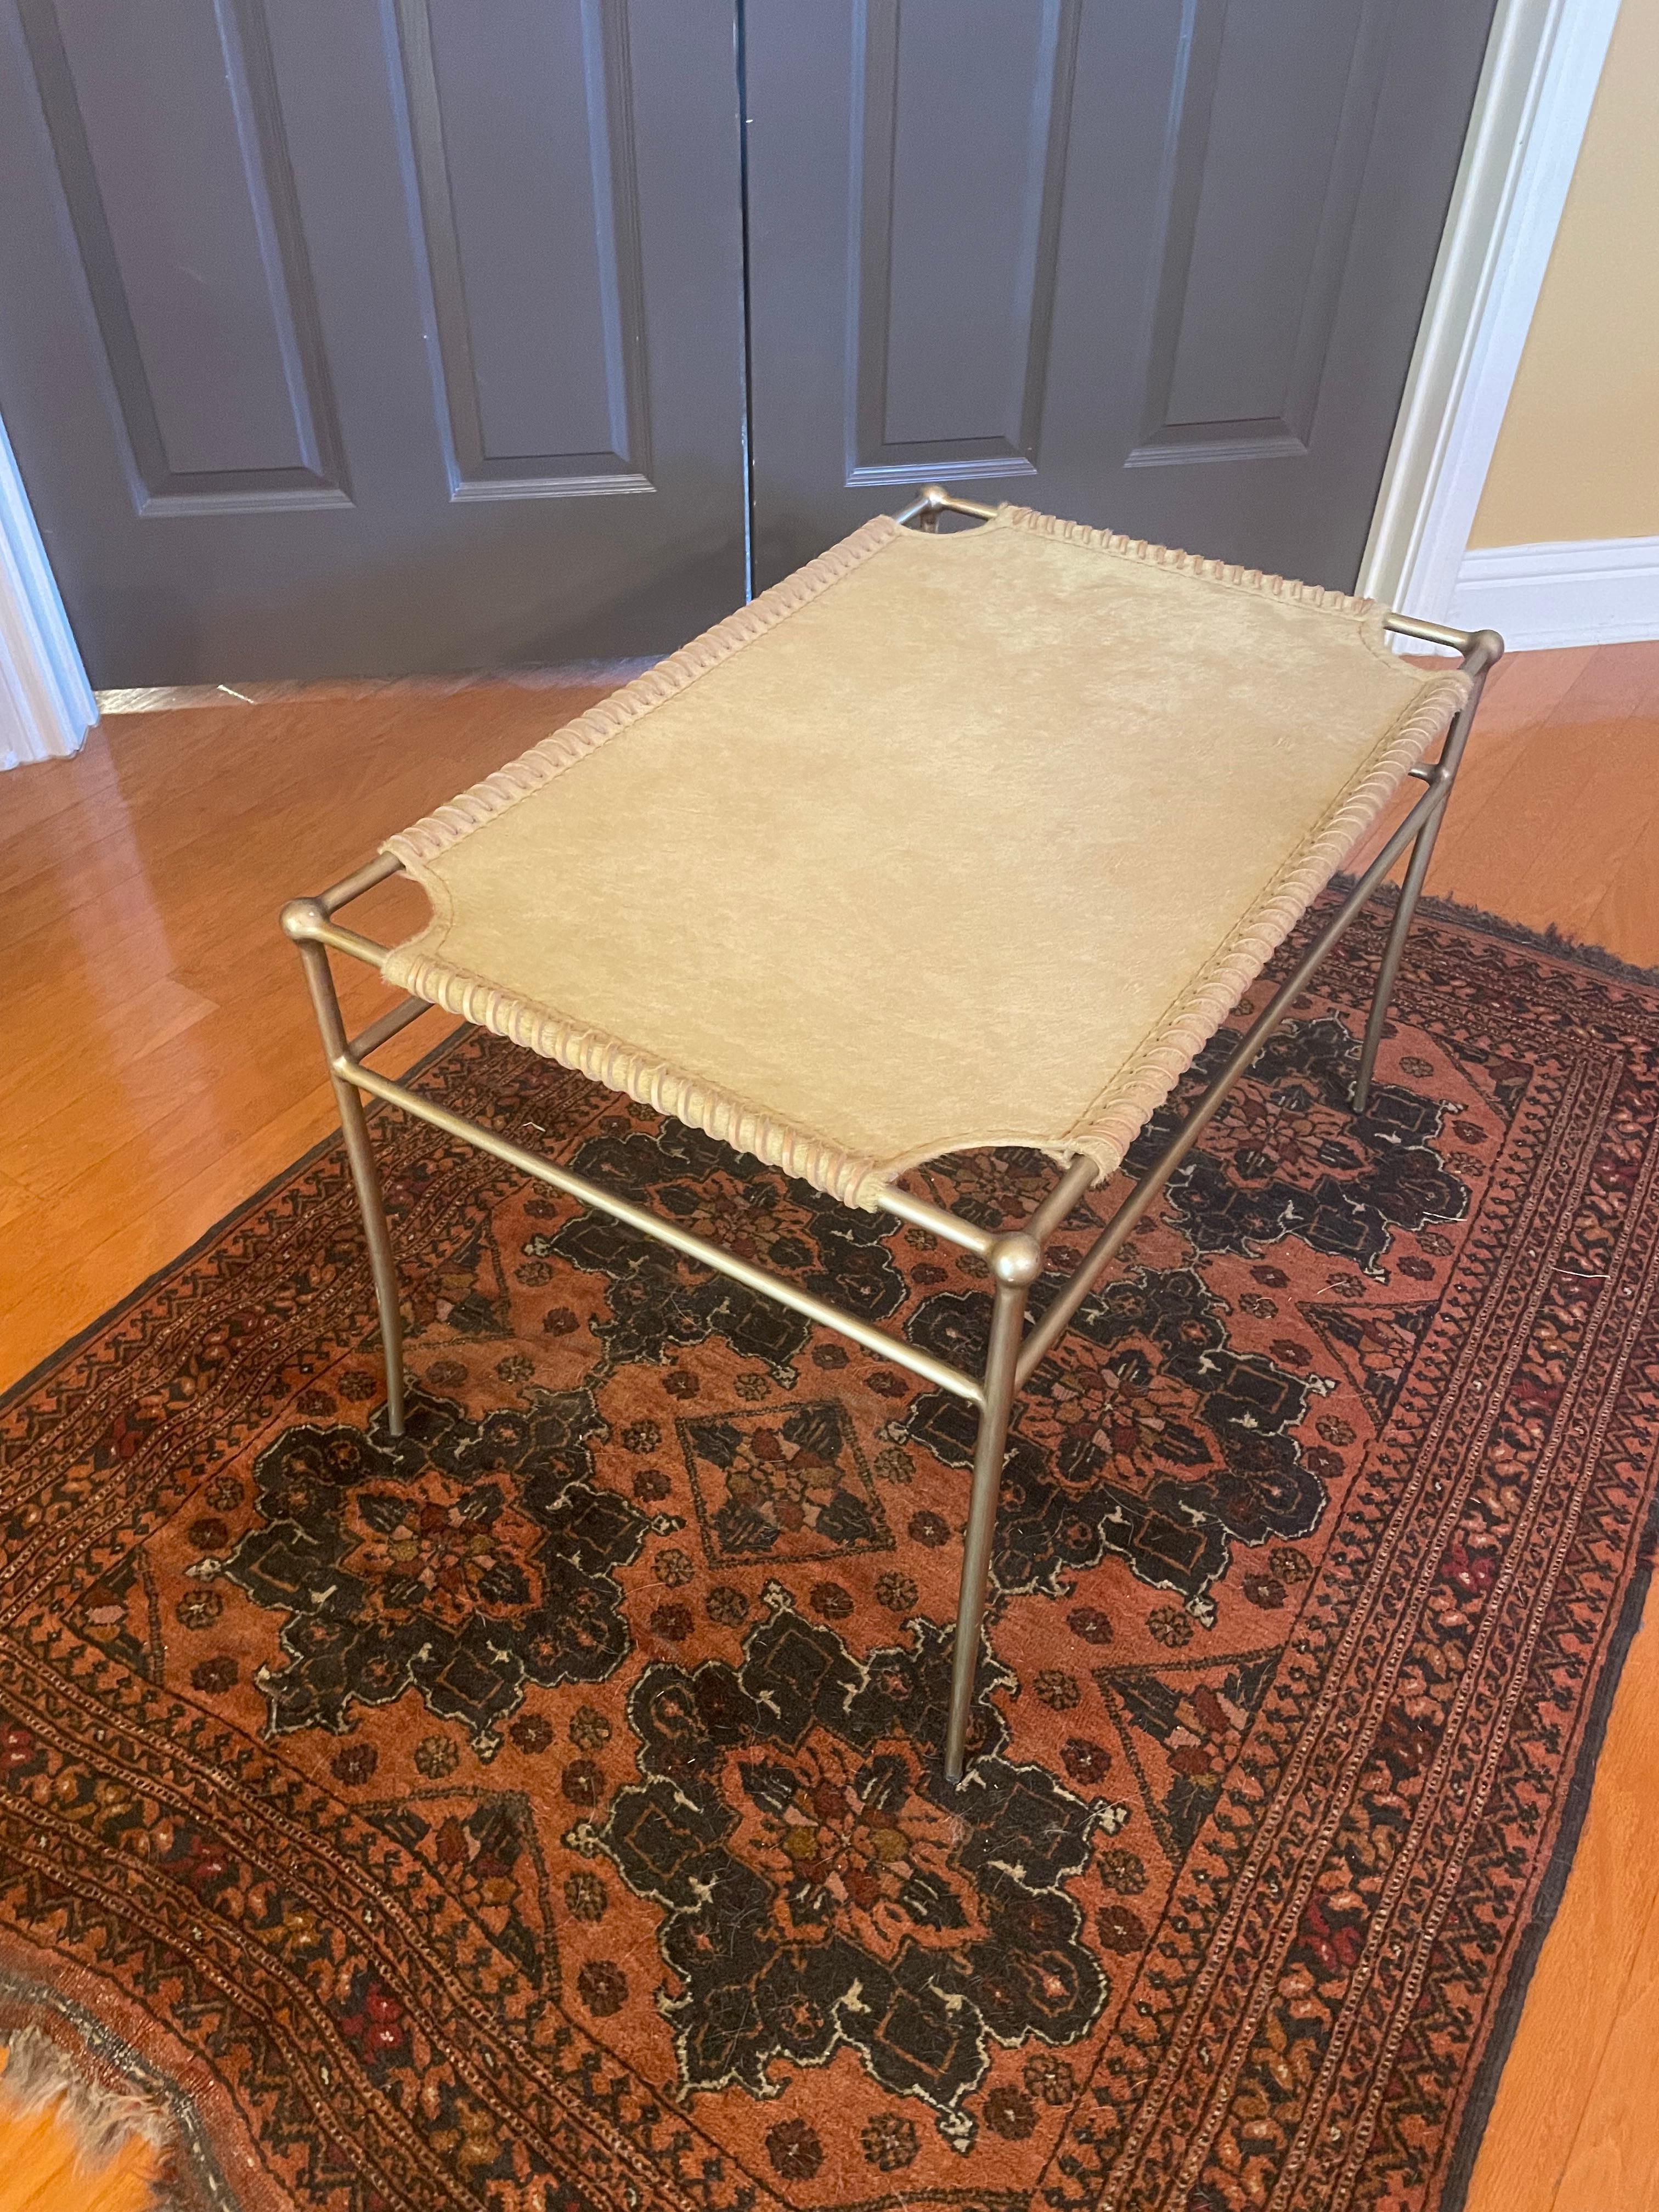 Umber-Colored Hide, Leather and Brass Bench In Excellent Condition For Sale In Austin, TX